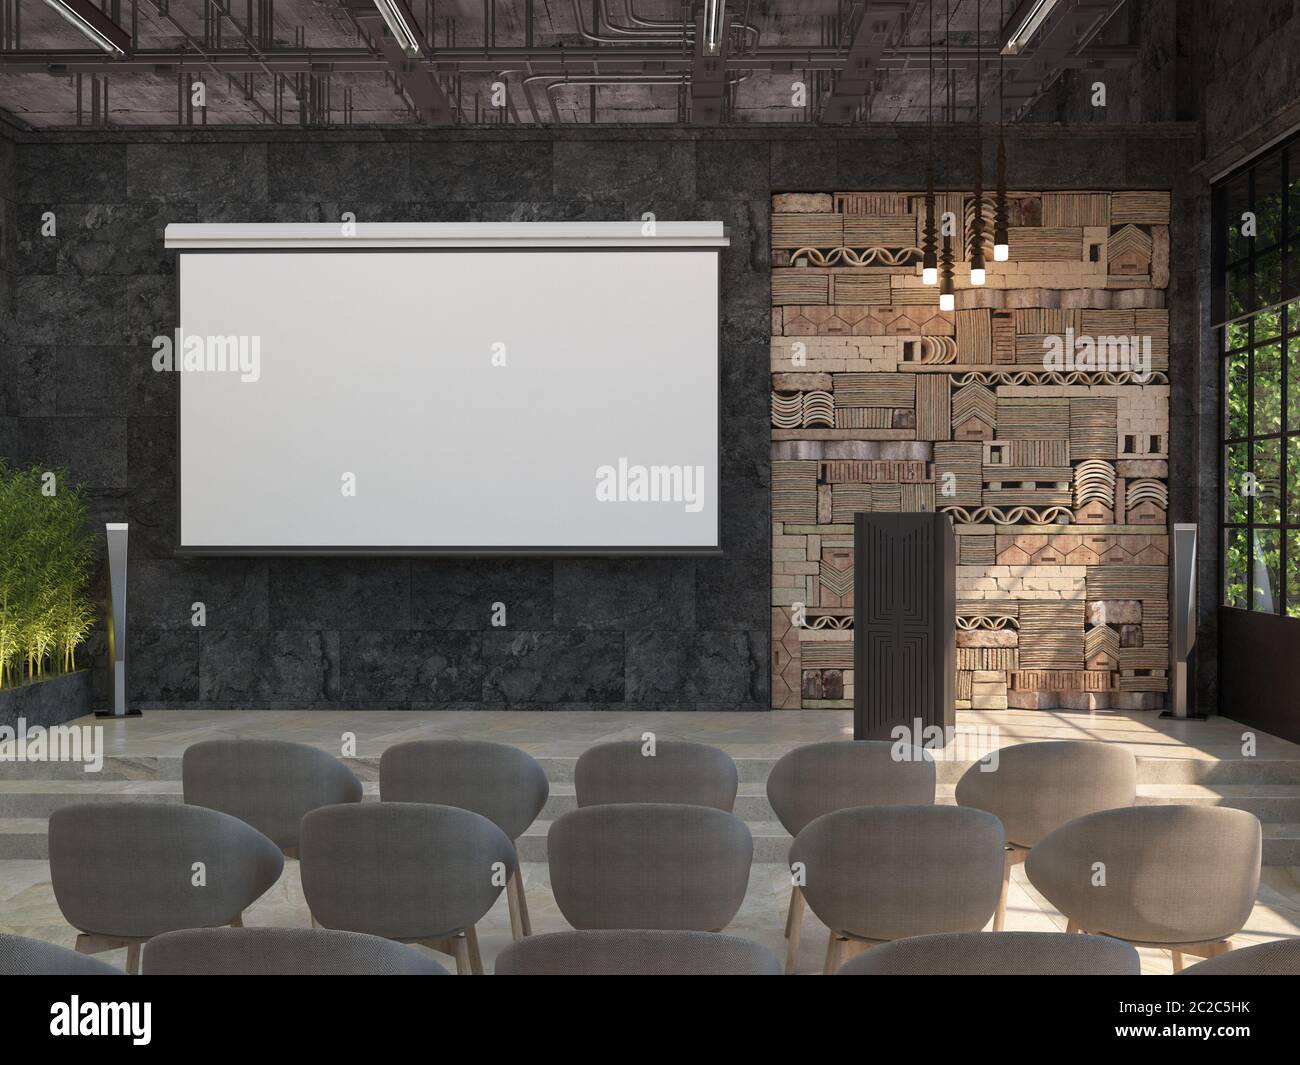 Download A Meeting Room With Blank White Screen For The Projector On The Black Wall The Interior Of The Conference Hall With A Stage And A Stand For Performan Stock Photo Alamy